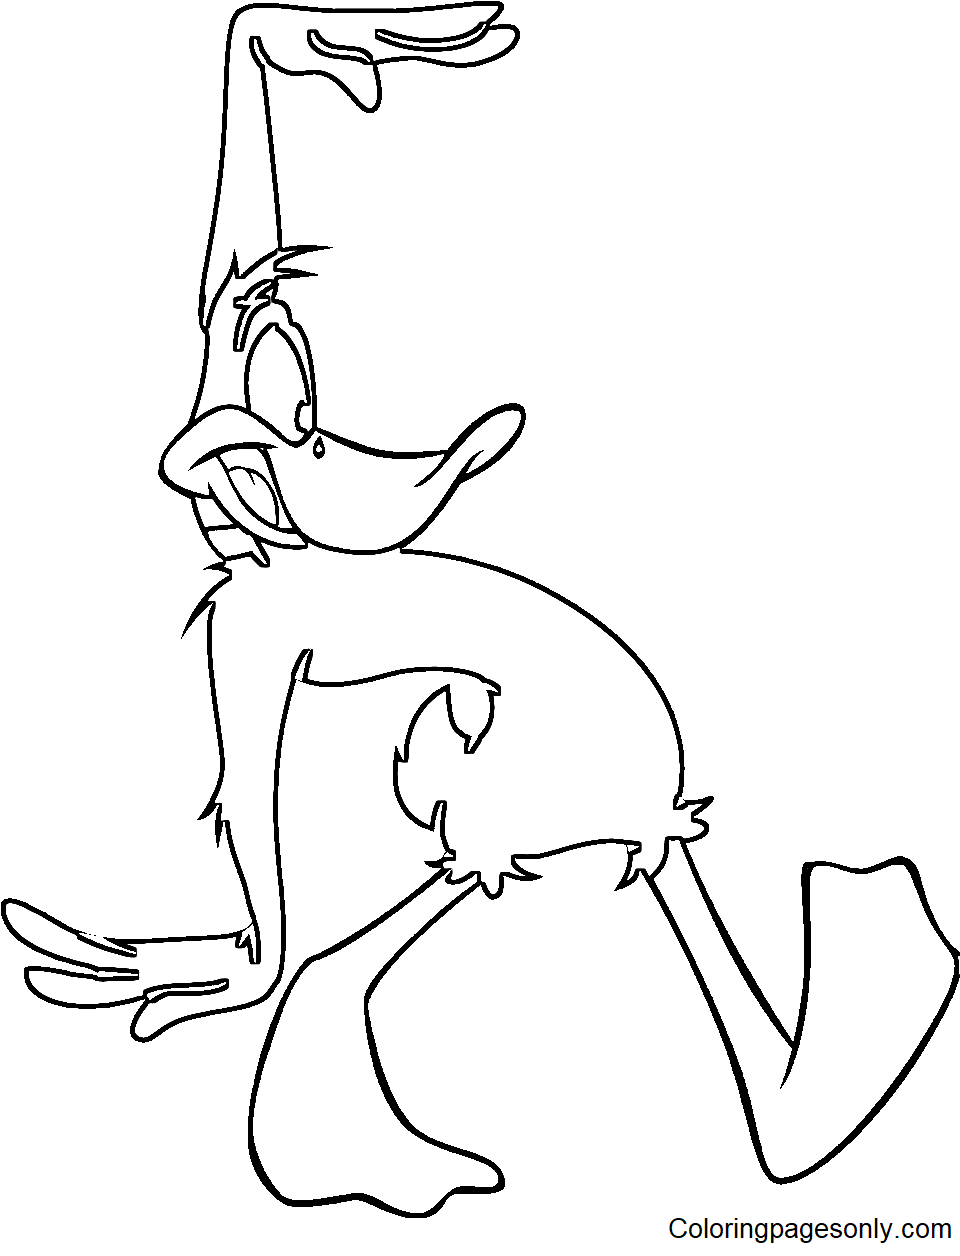 Daffy Duck Coloring Pages Home Design Ideas